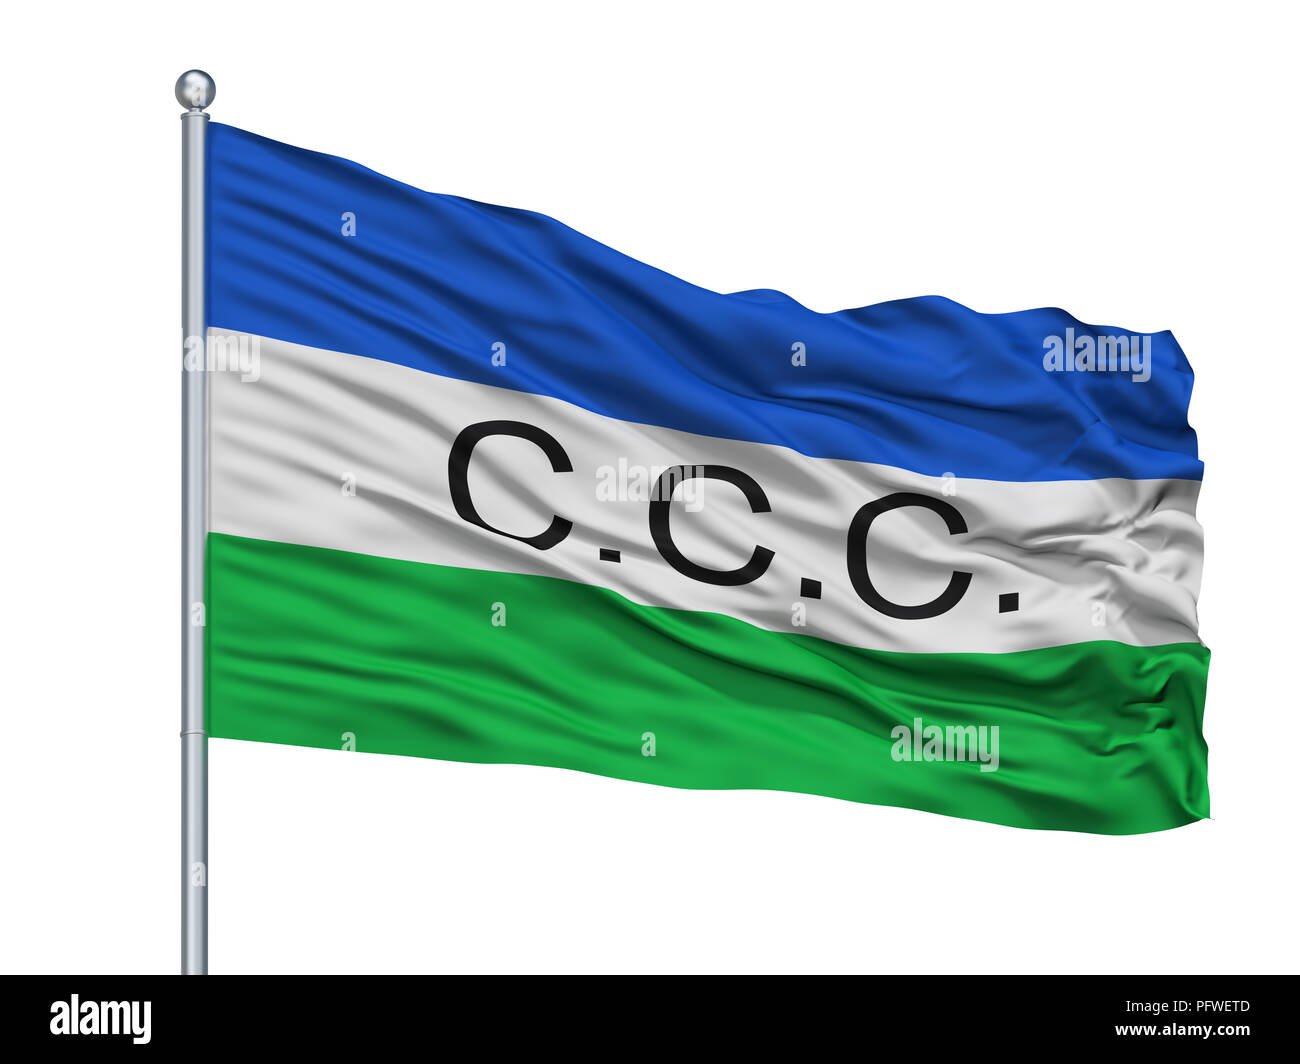 Curillo City Flag On Flagpole, Colombia, Caqueta Department, Isolated On White Background Stock Photo